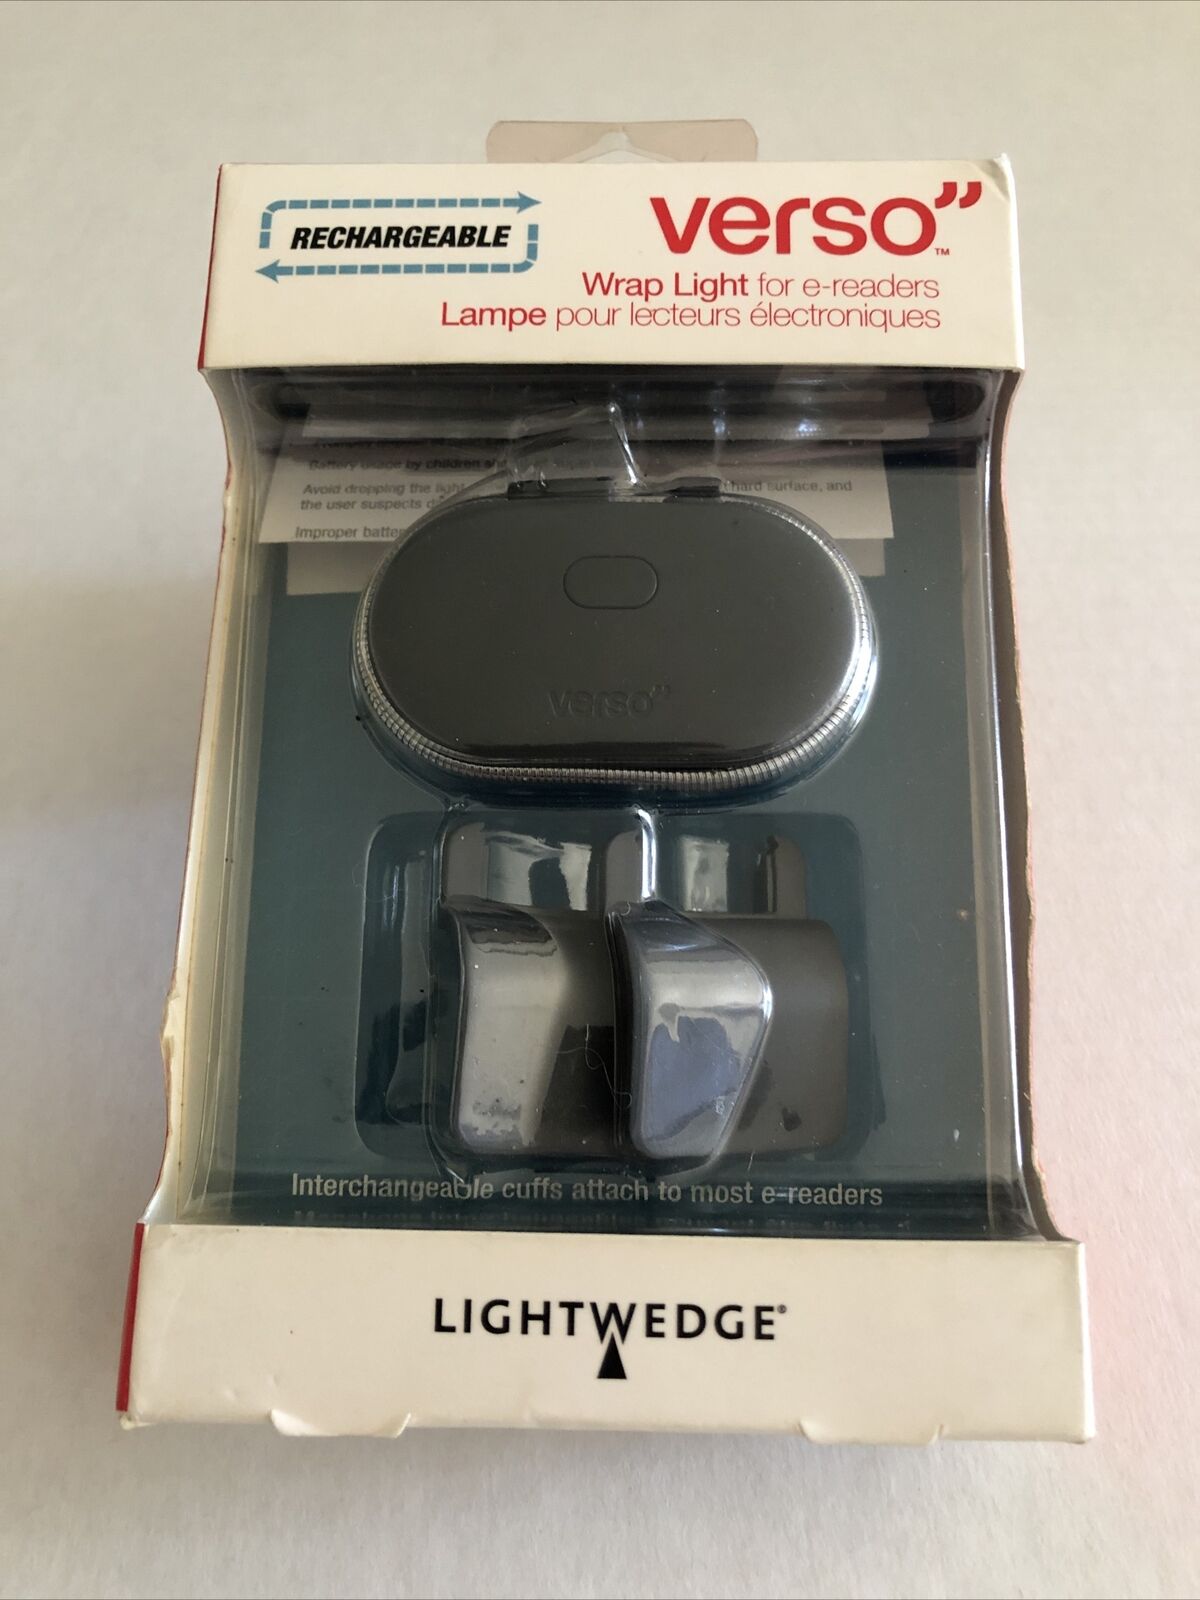 Lightwedge Verso Rechargeable Wrap Light For E-readers Brand New In Box.